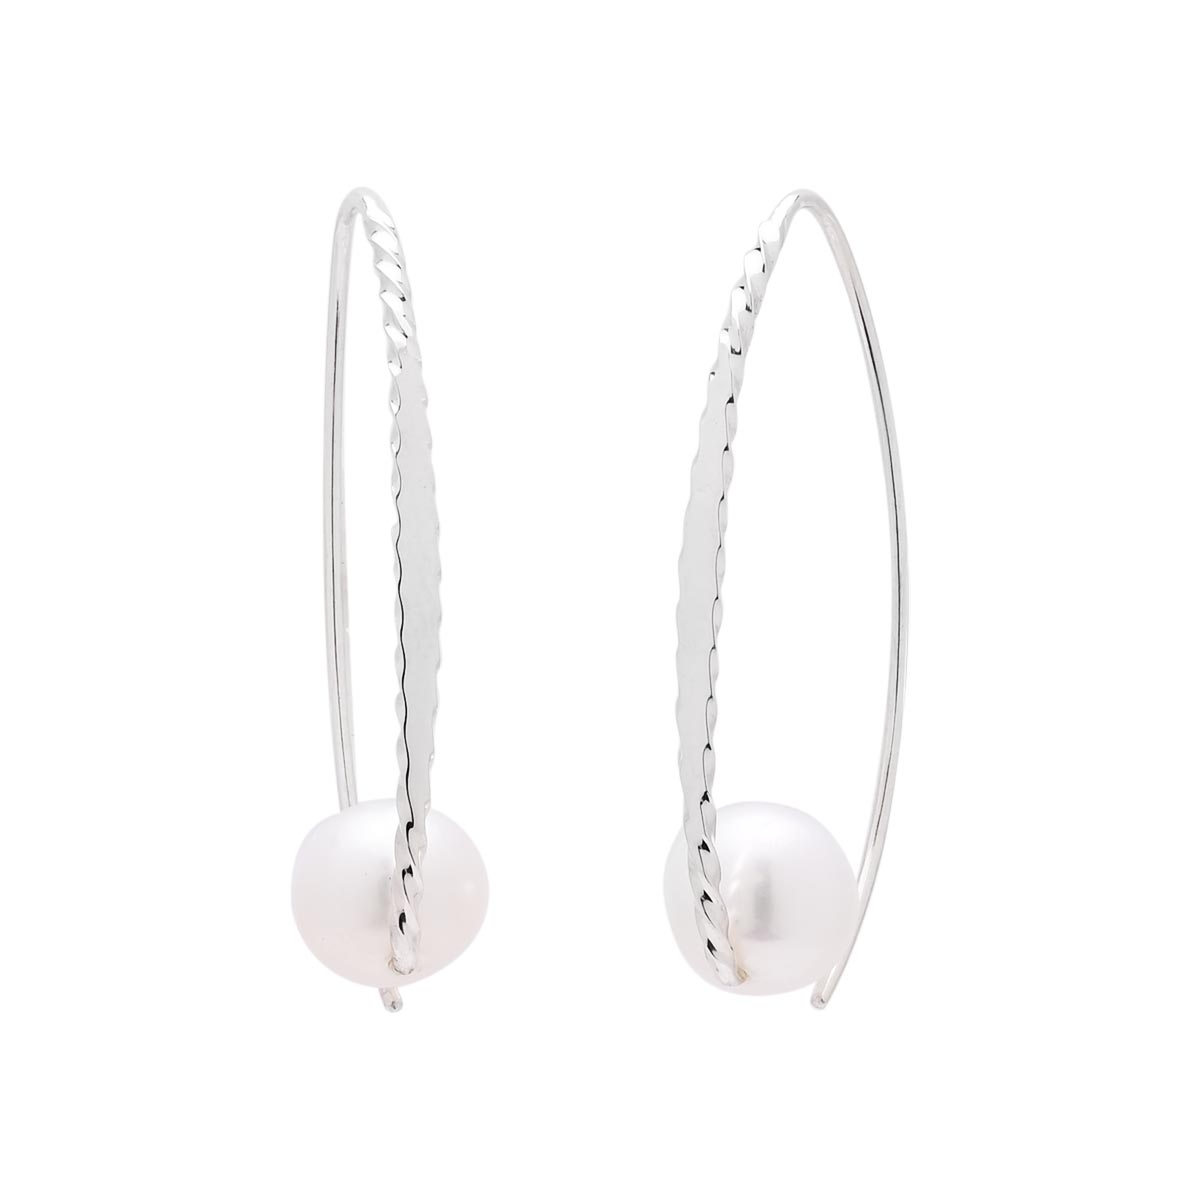 E.L. Designs Cultured Freshwater Pearl Embrace Earrings in Sterling Silver (8mm pearls)